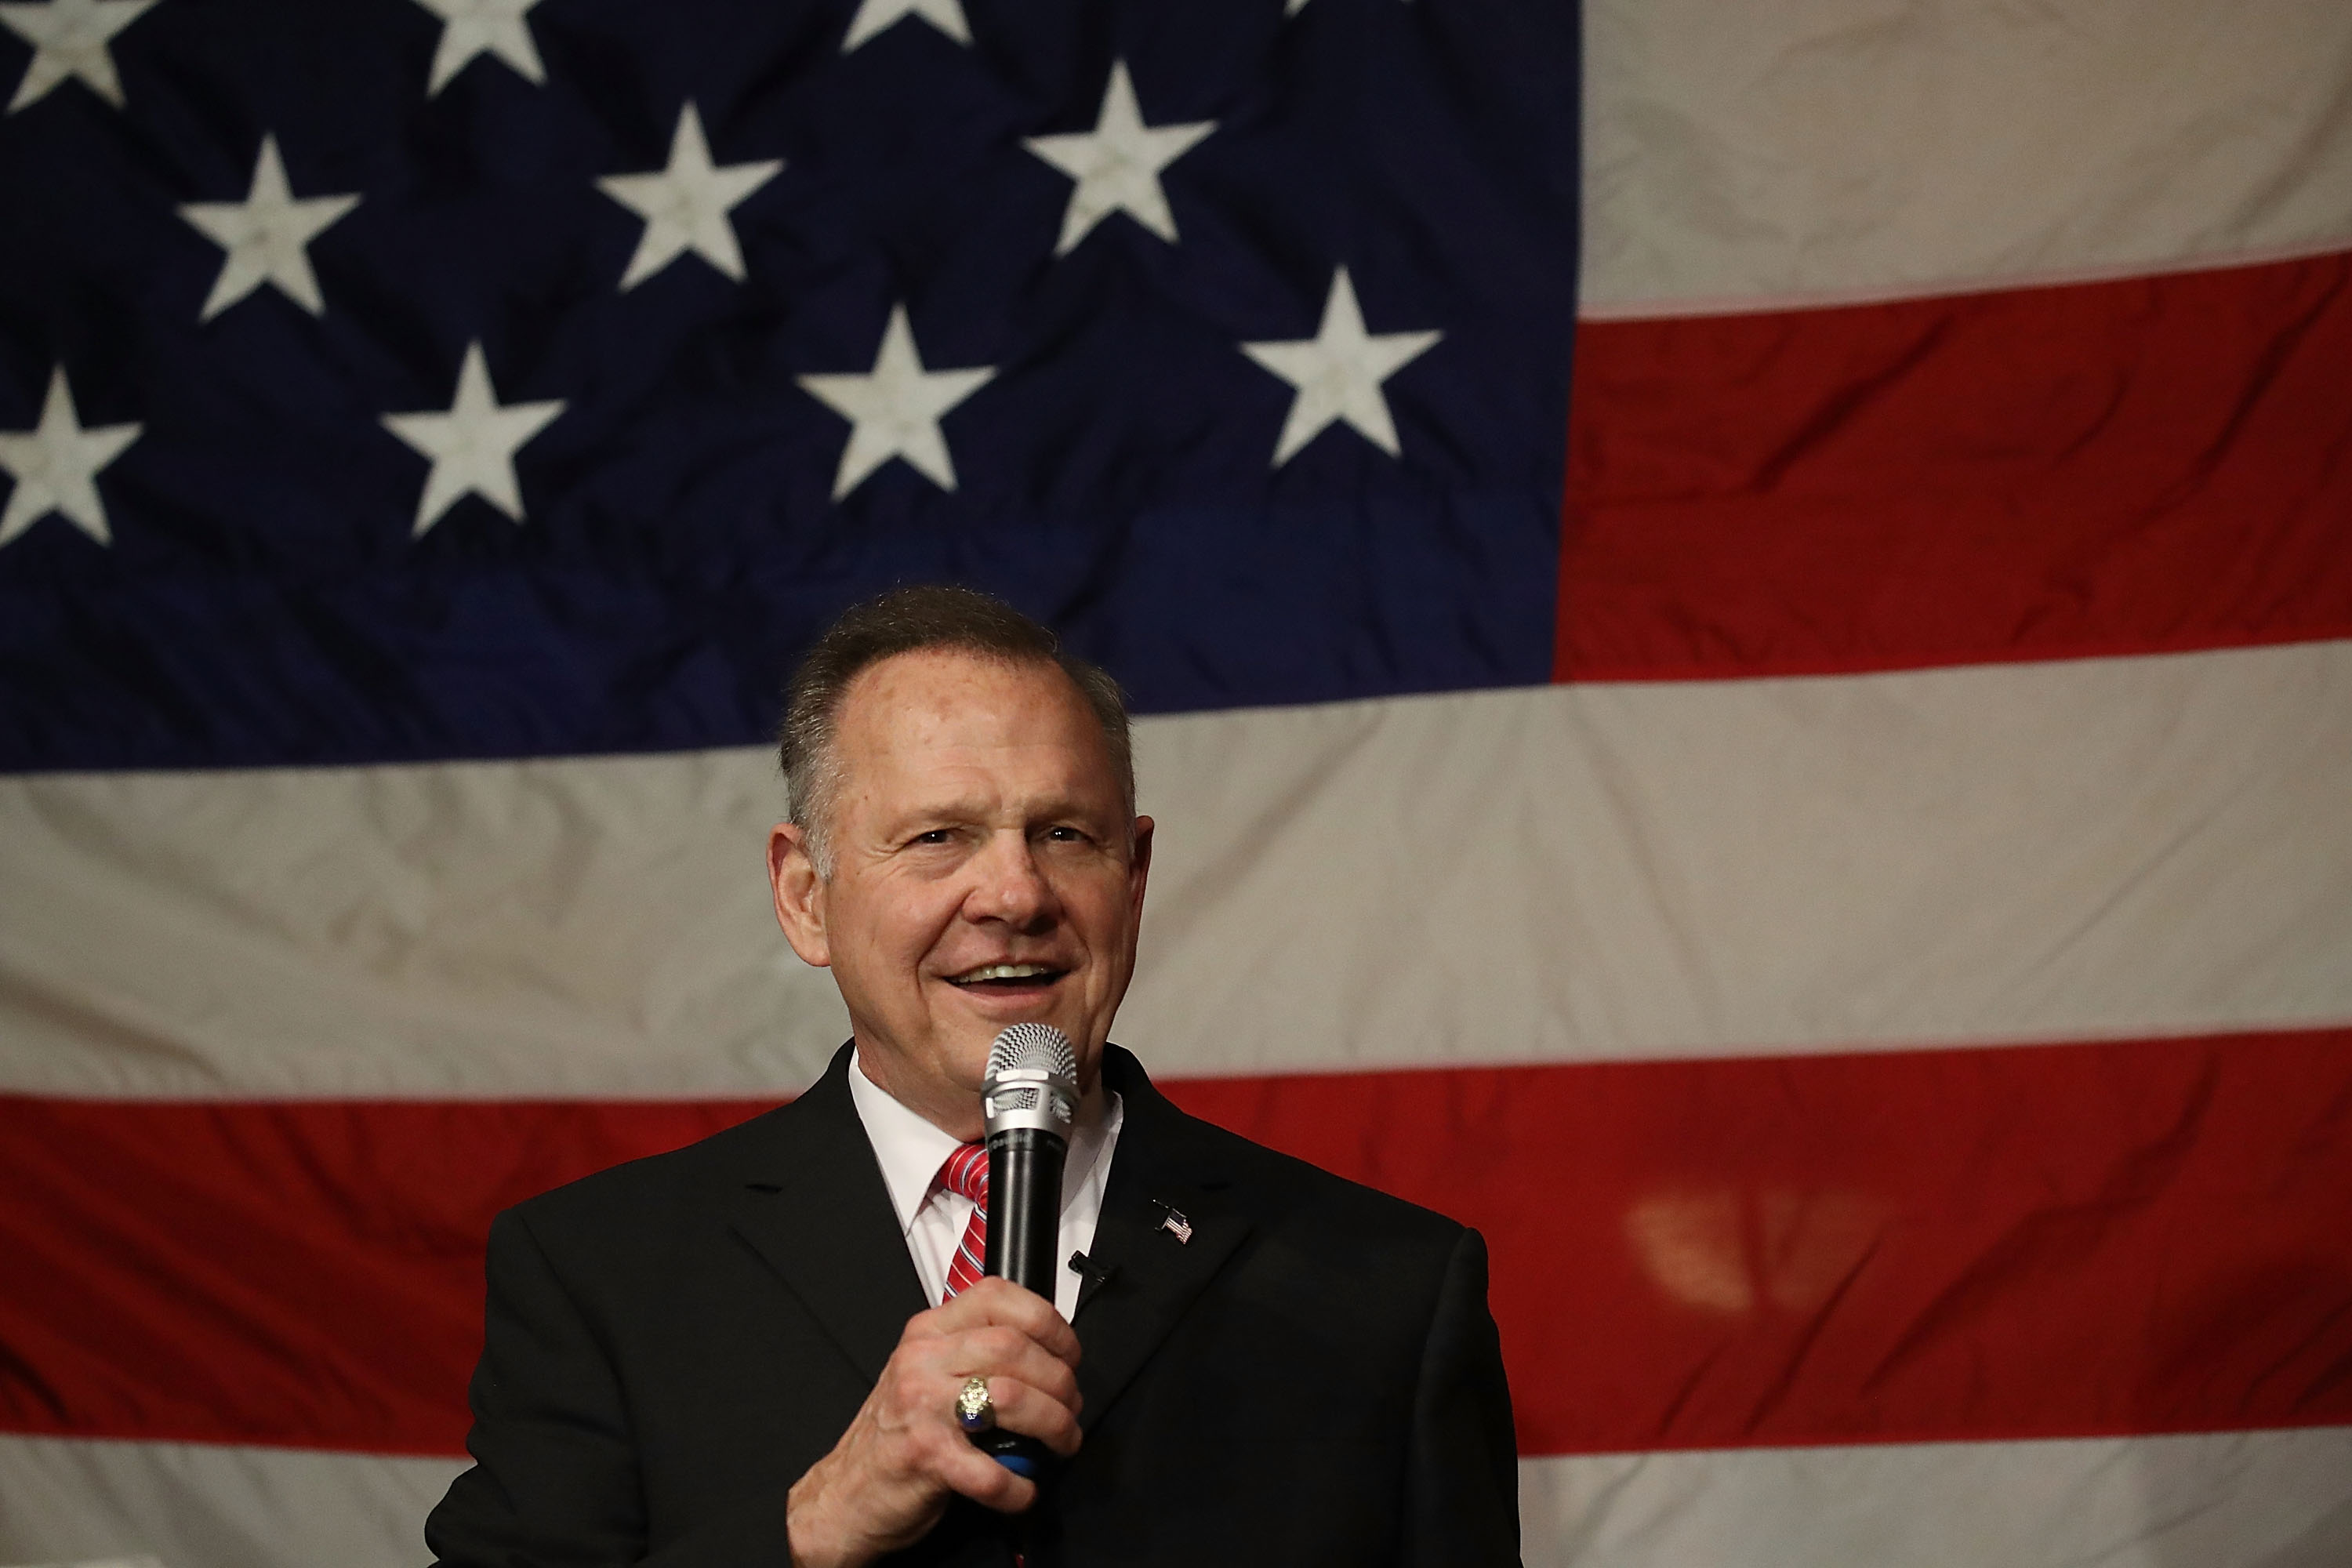 Republican Senatorial candidate Roy Moore speaks during a campaign event on Dec. 5, 2017 in Fairhope, Alabama. (Joe Raedle—Getty Images)